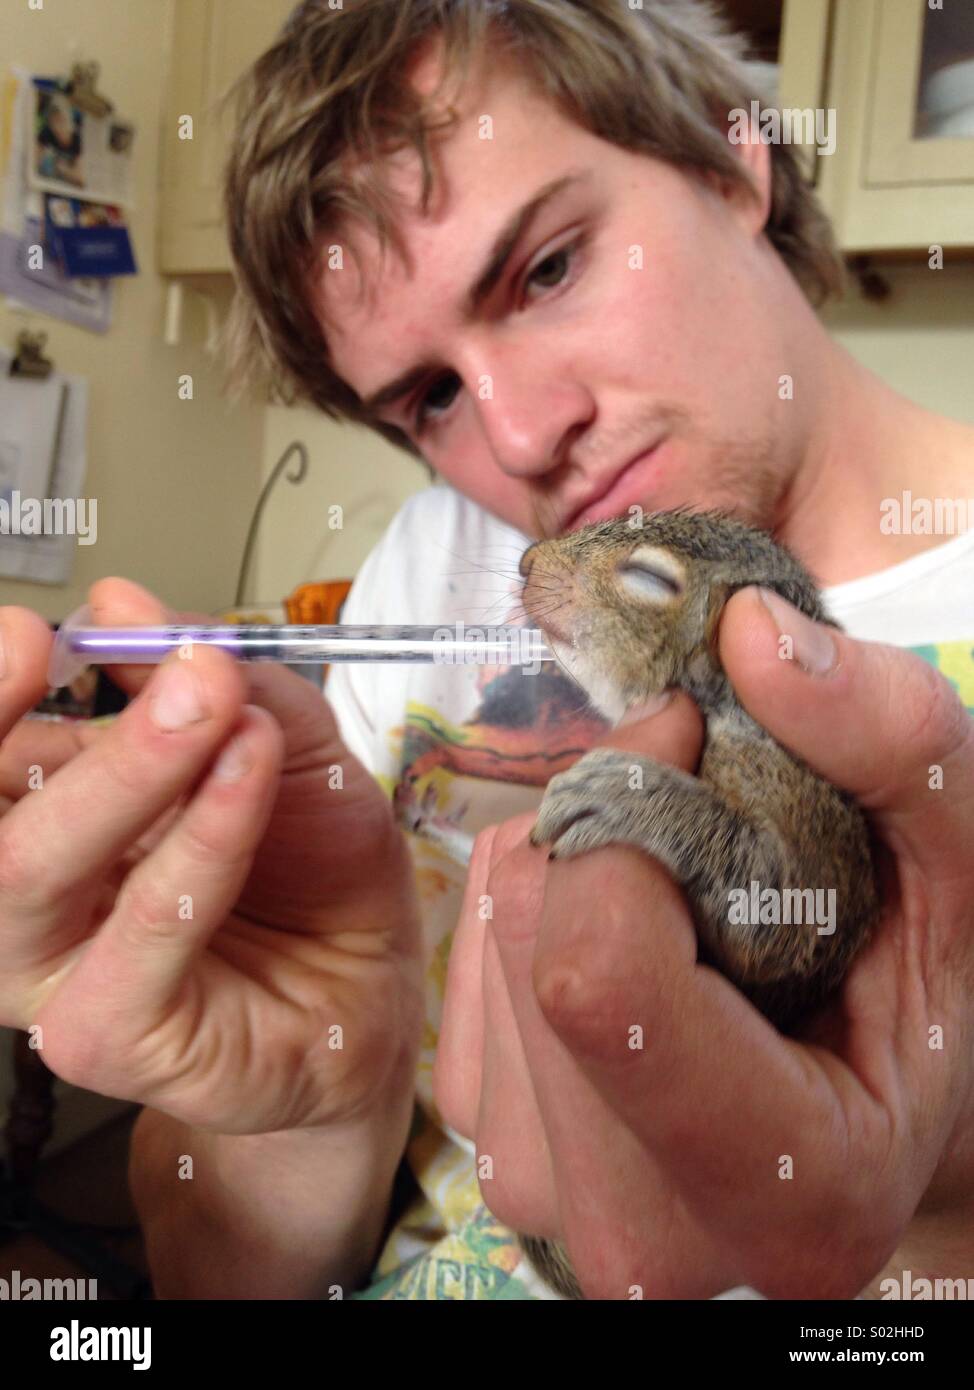 A baby squirrel is hand reared by the forester who found it in a felled tree Stock Photo